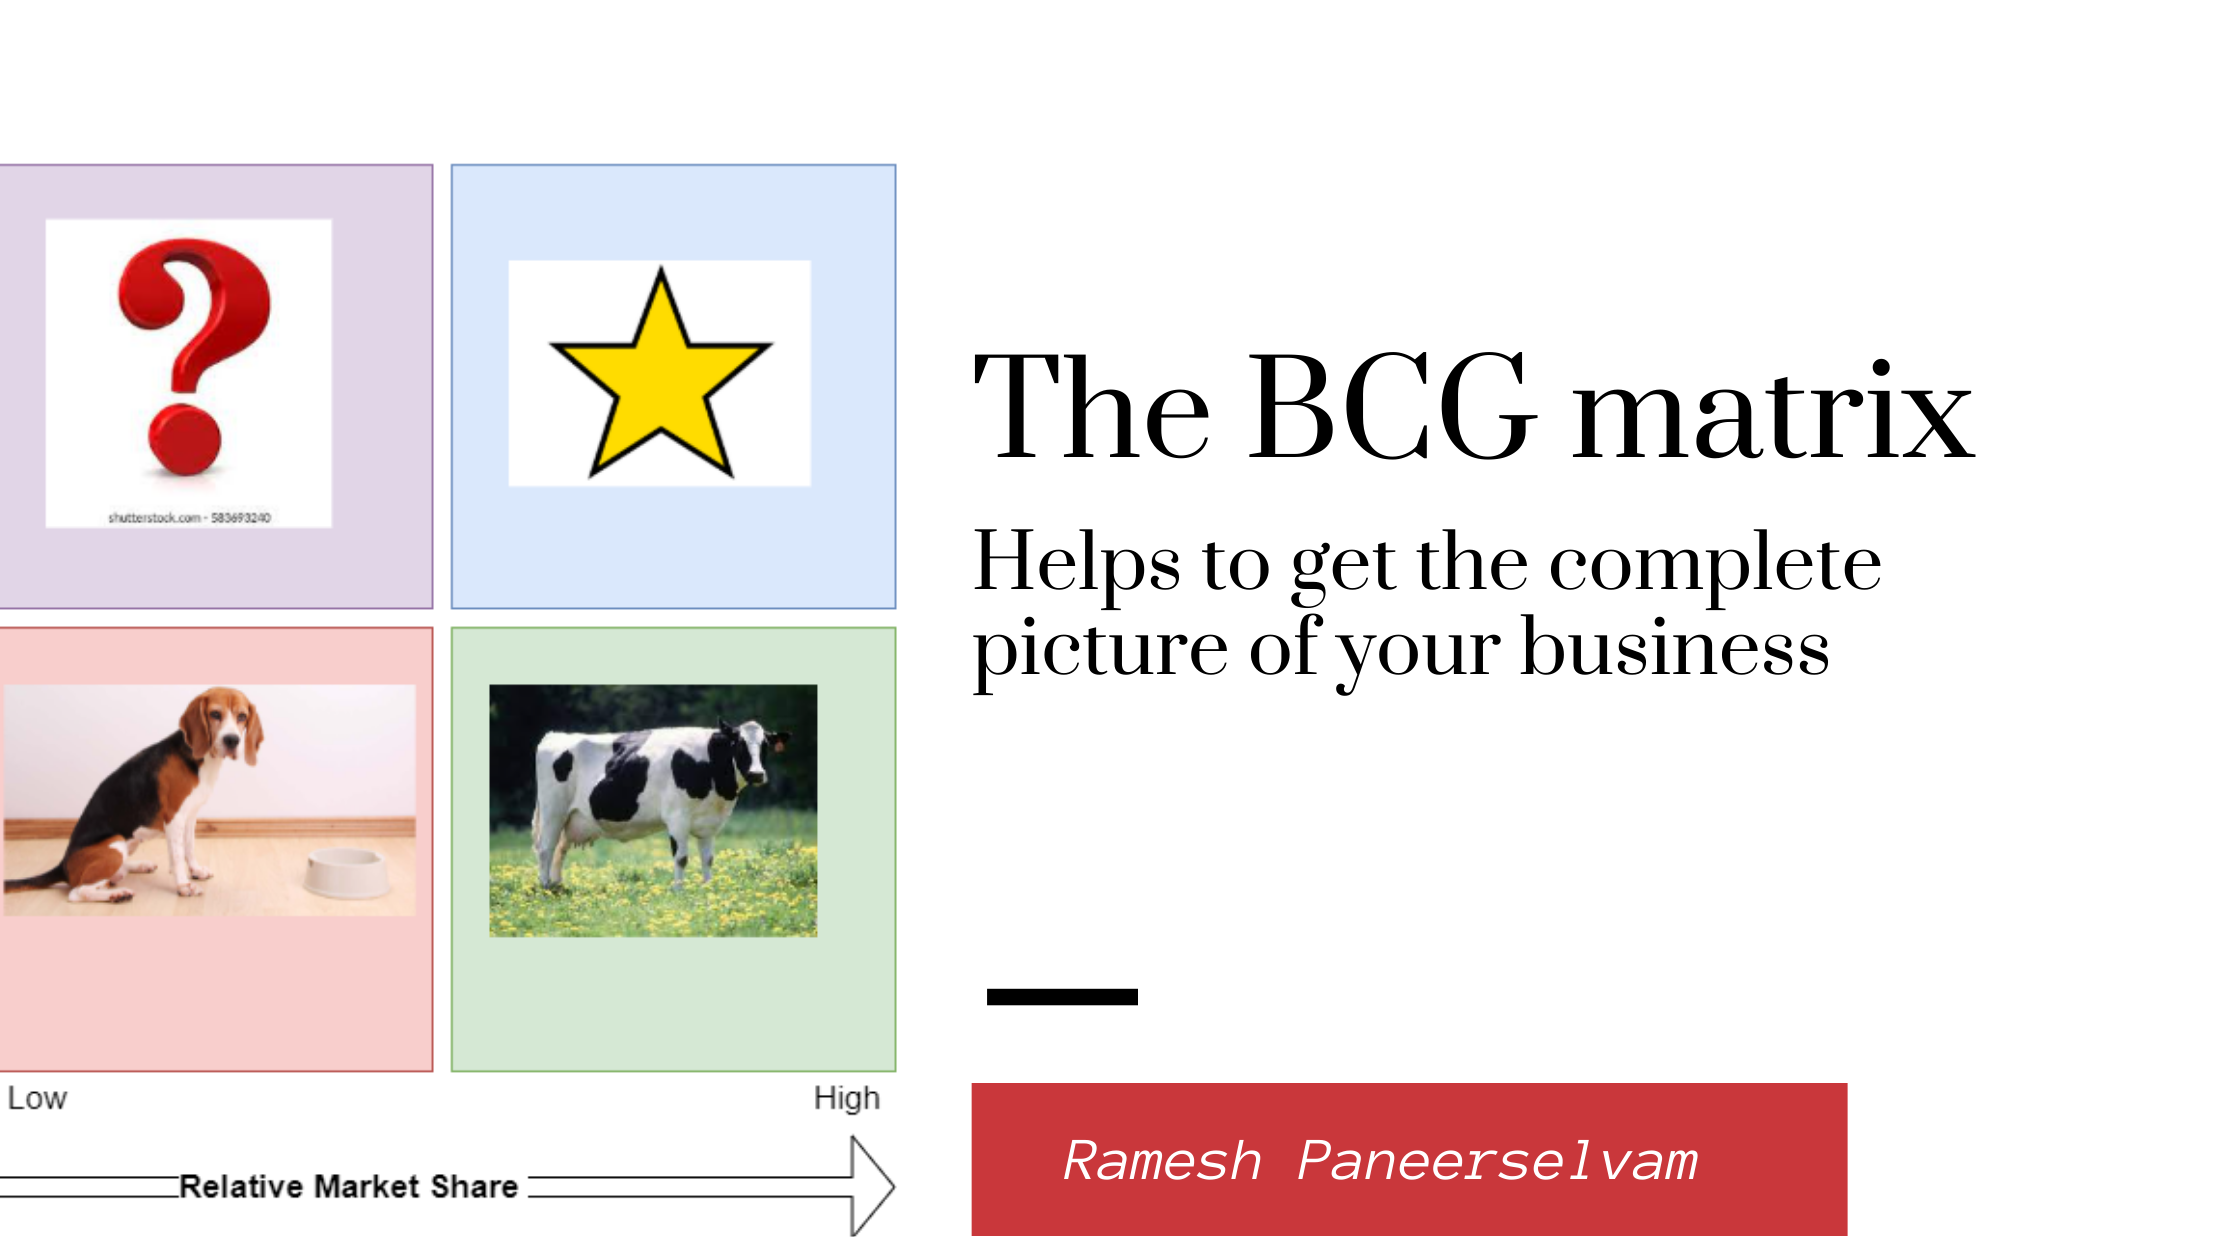 The BCG matrix with visual aids and easy-to-understand with metaphors